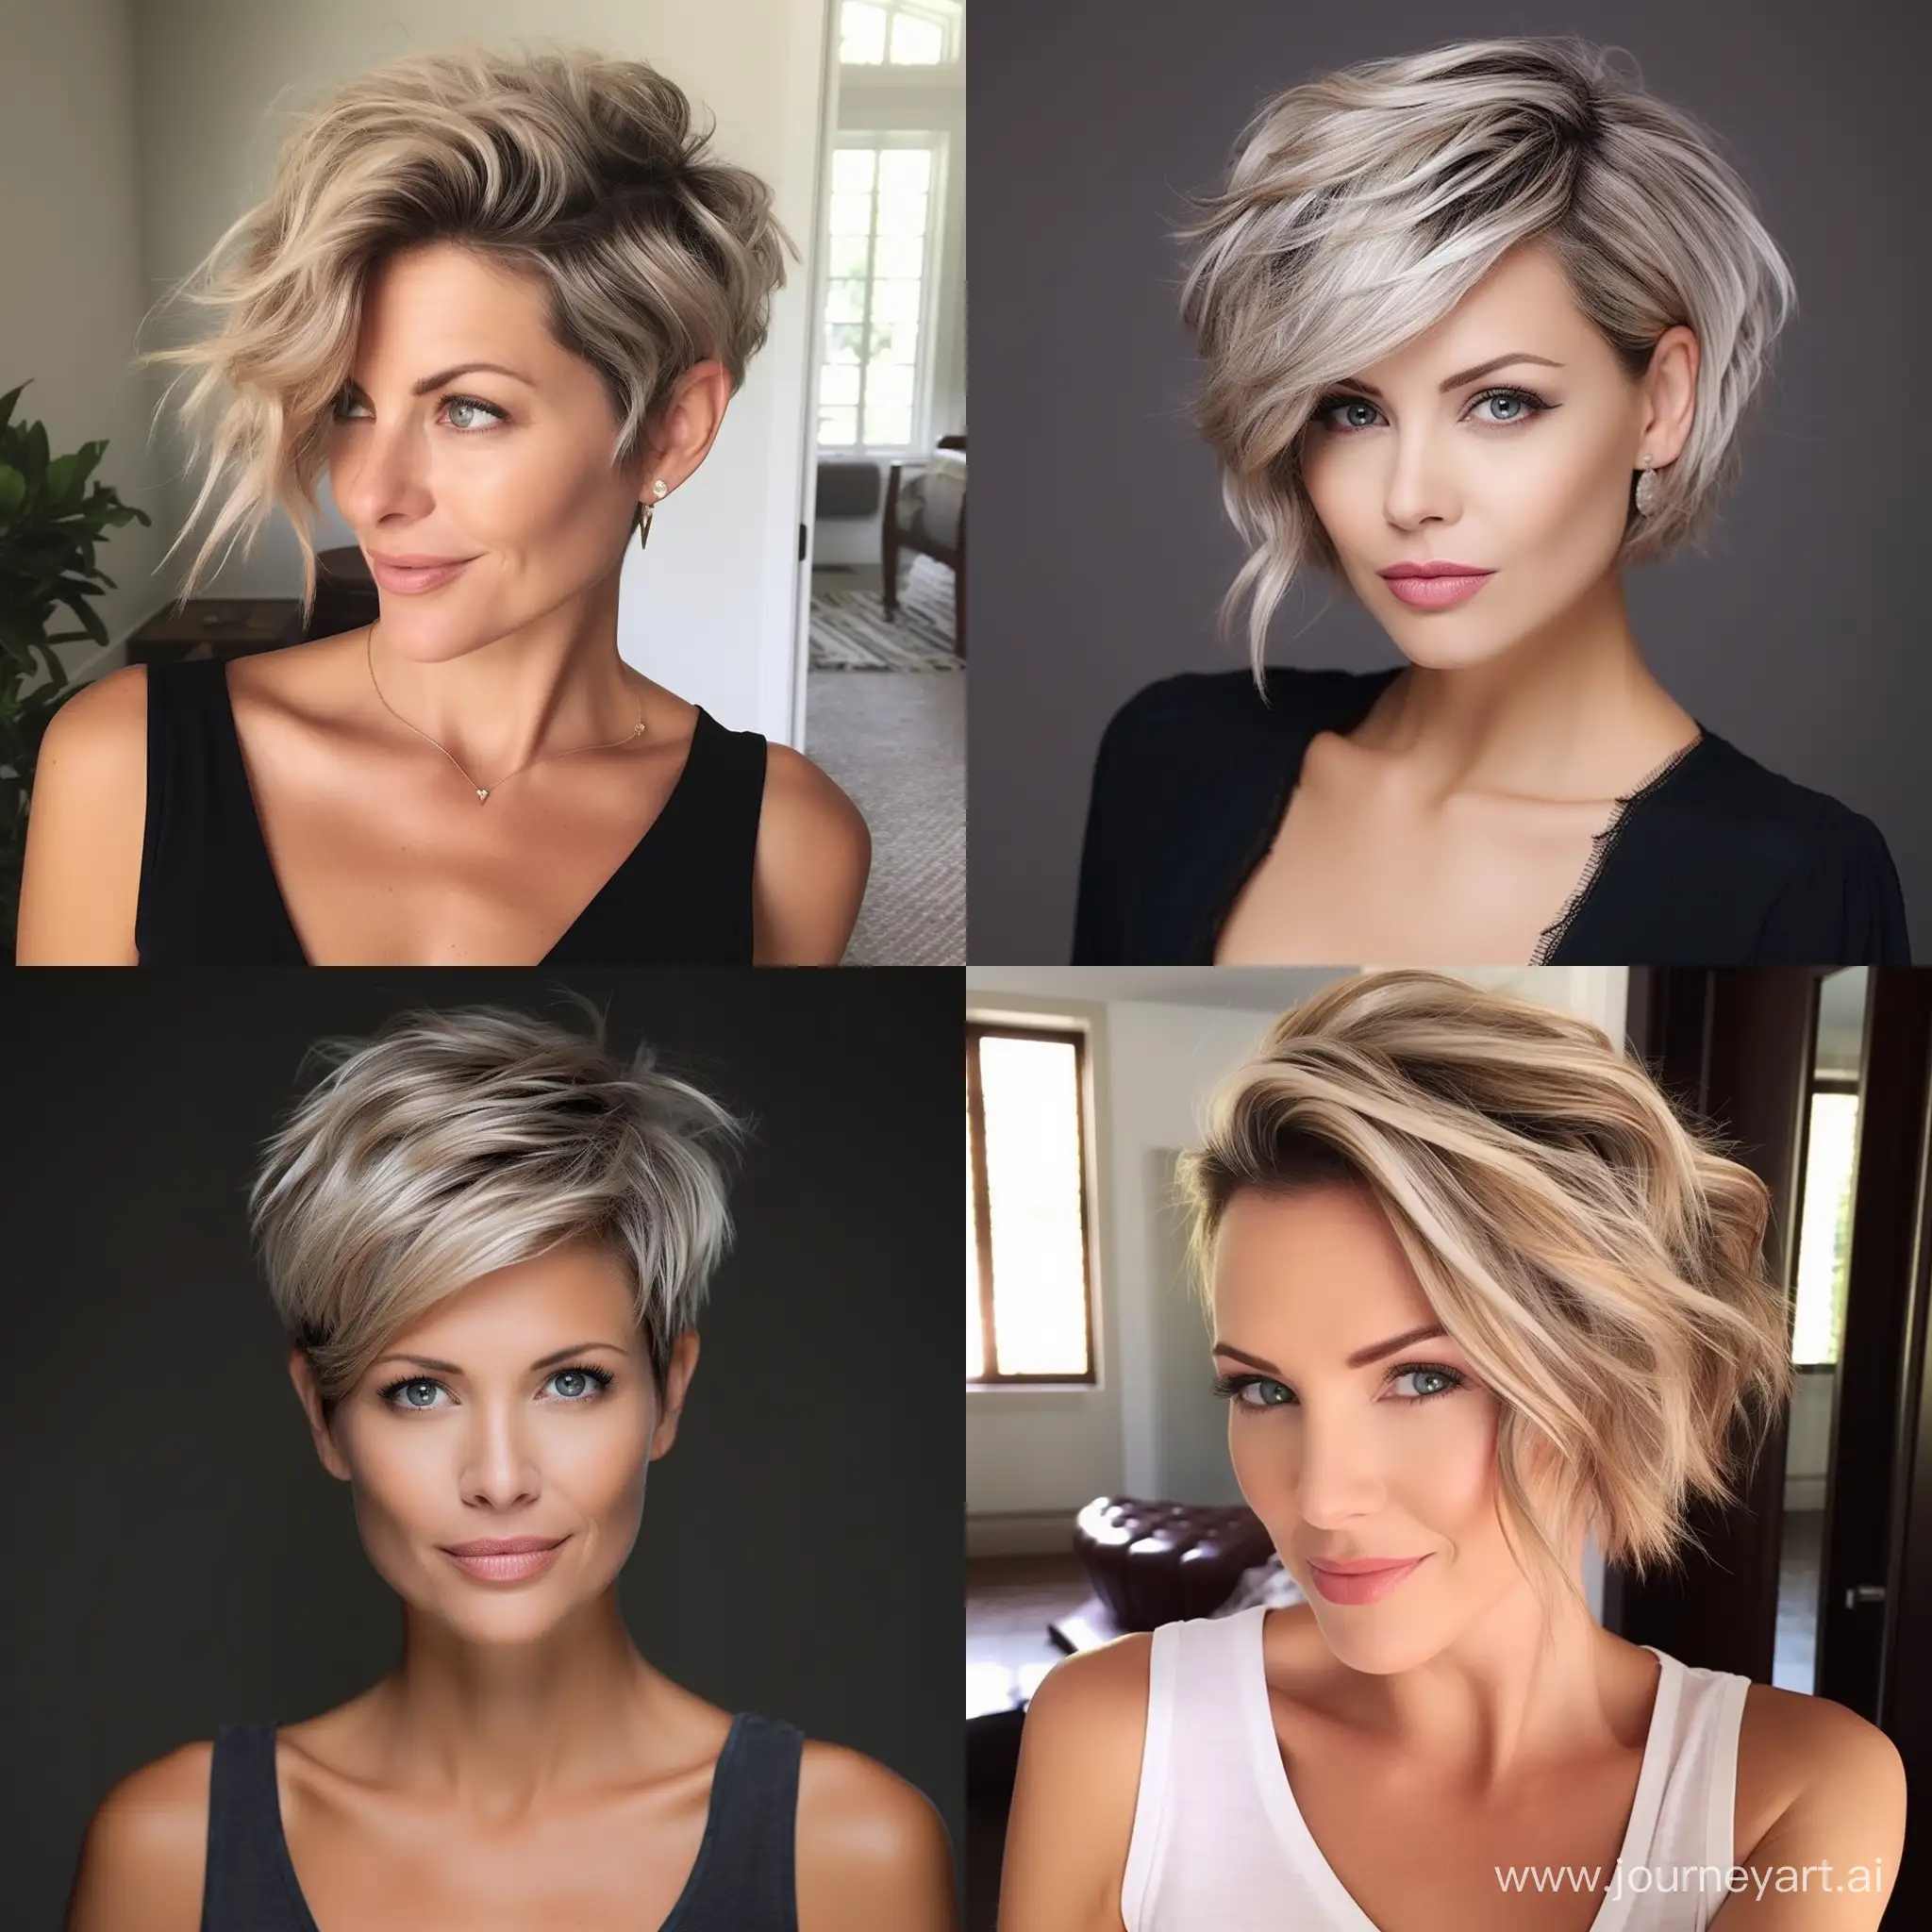 Chic-Short-Haircuts-for-Stylish-Women-Over-40-AR-11-Trendy-No-91719